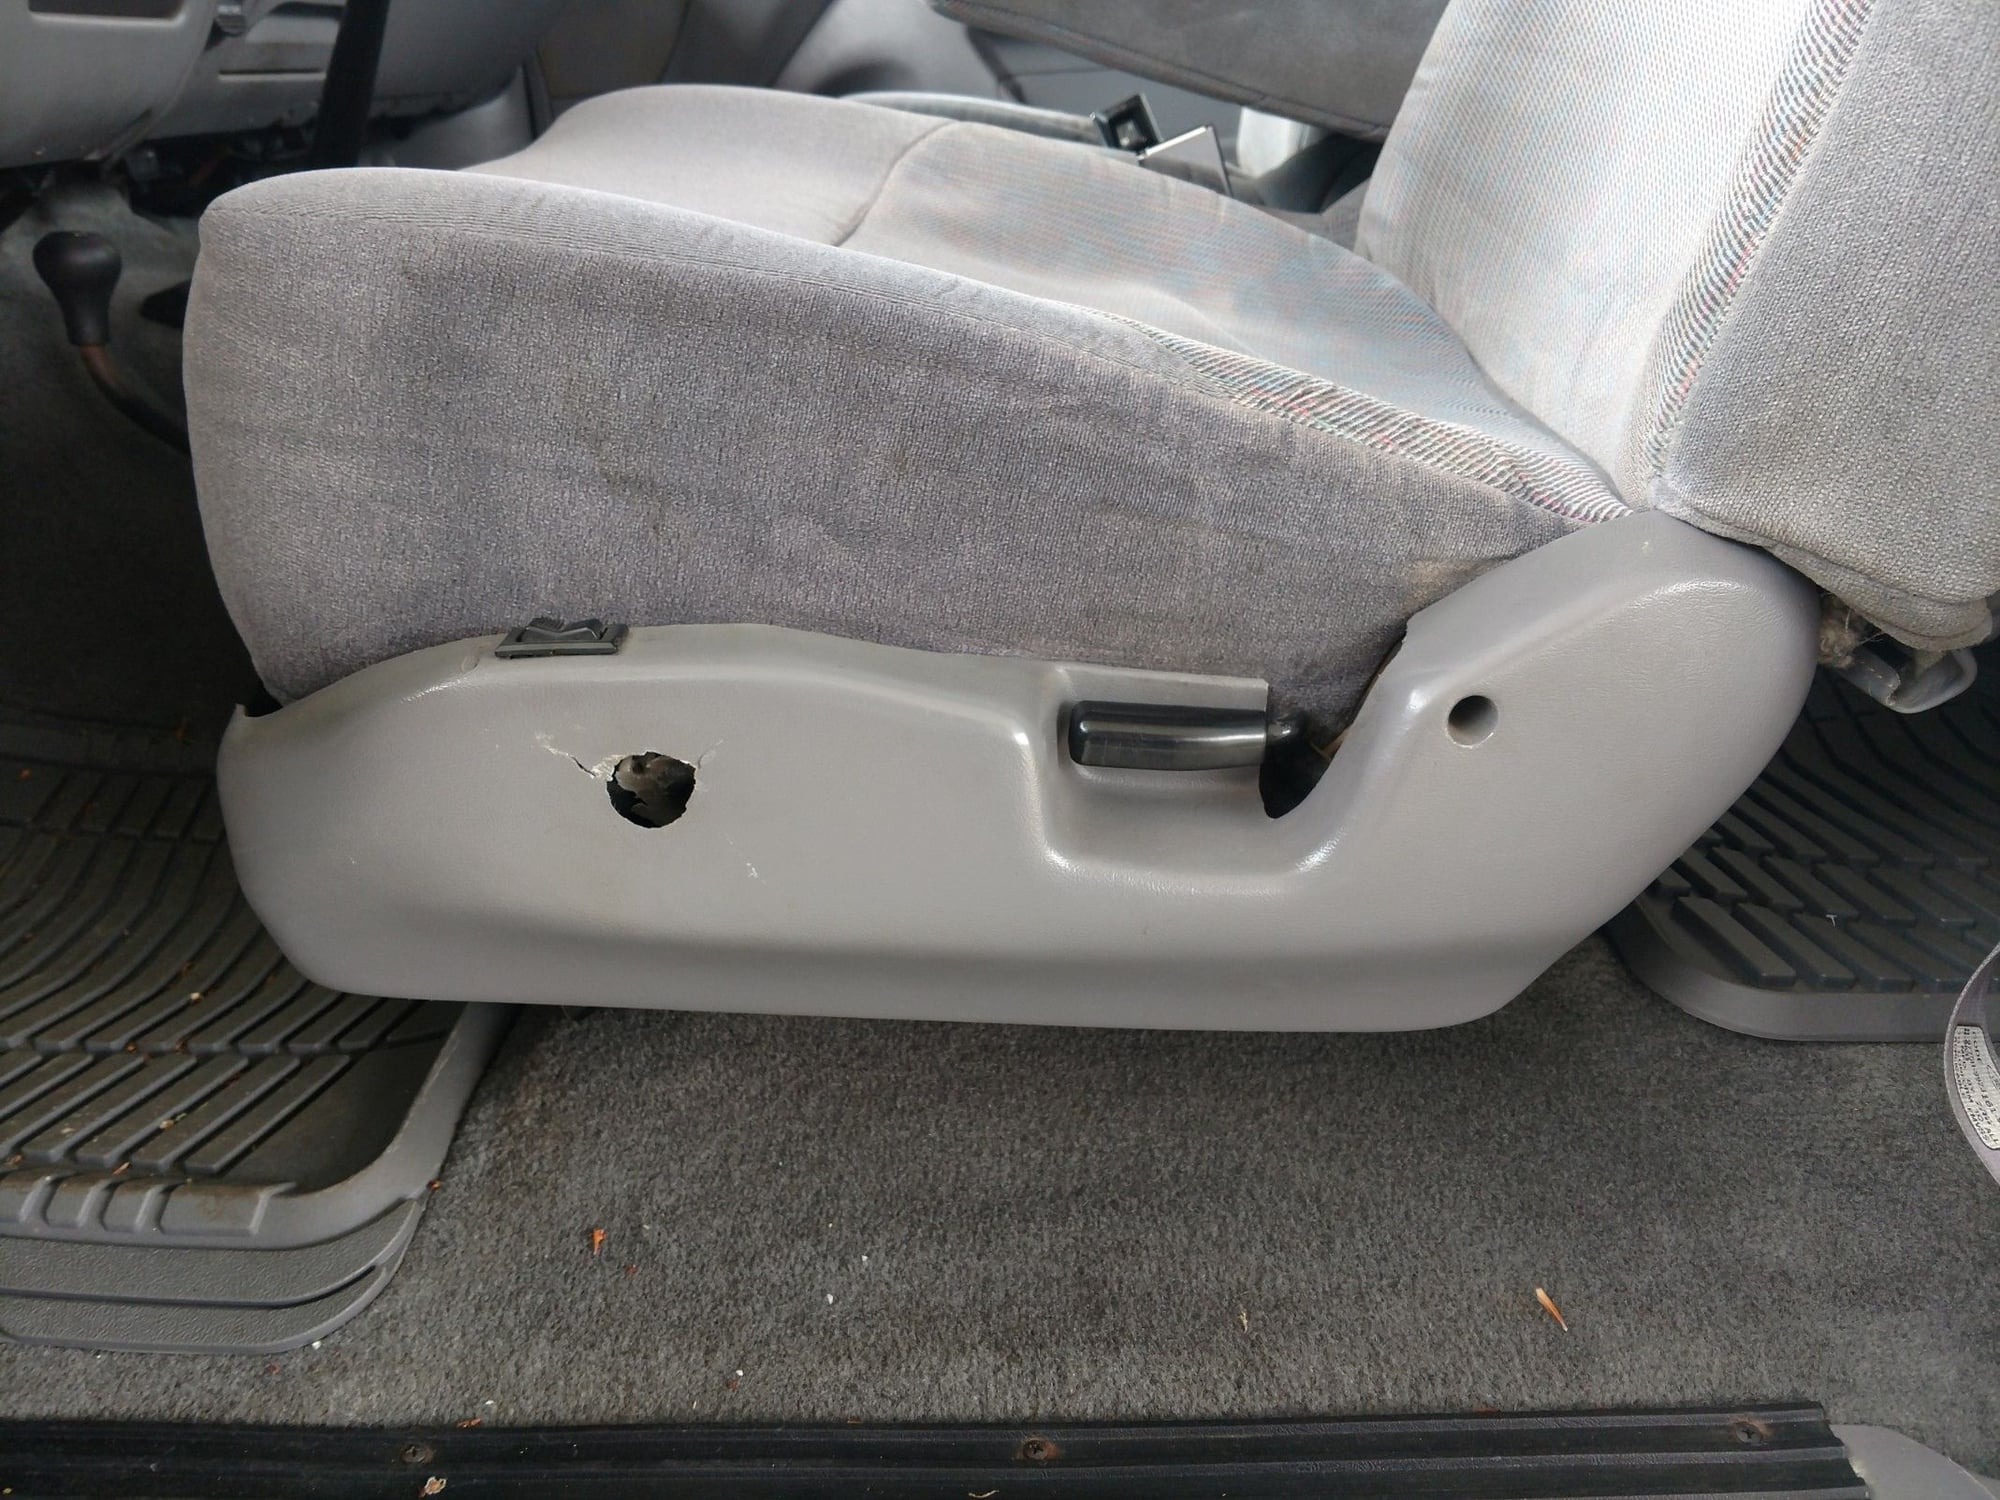 Interior/Upholstery - Wanted: Driver's Seat Trim 92-96 OBS - Used - 1992 to 1997 Ford 1/2 Ton Pickup - Pittsburgh, PA 15237, United States